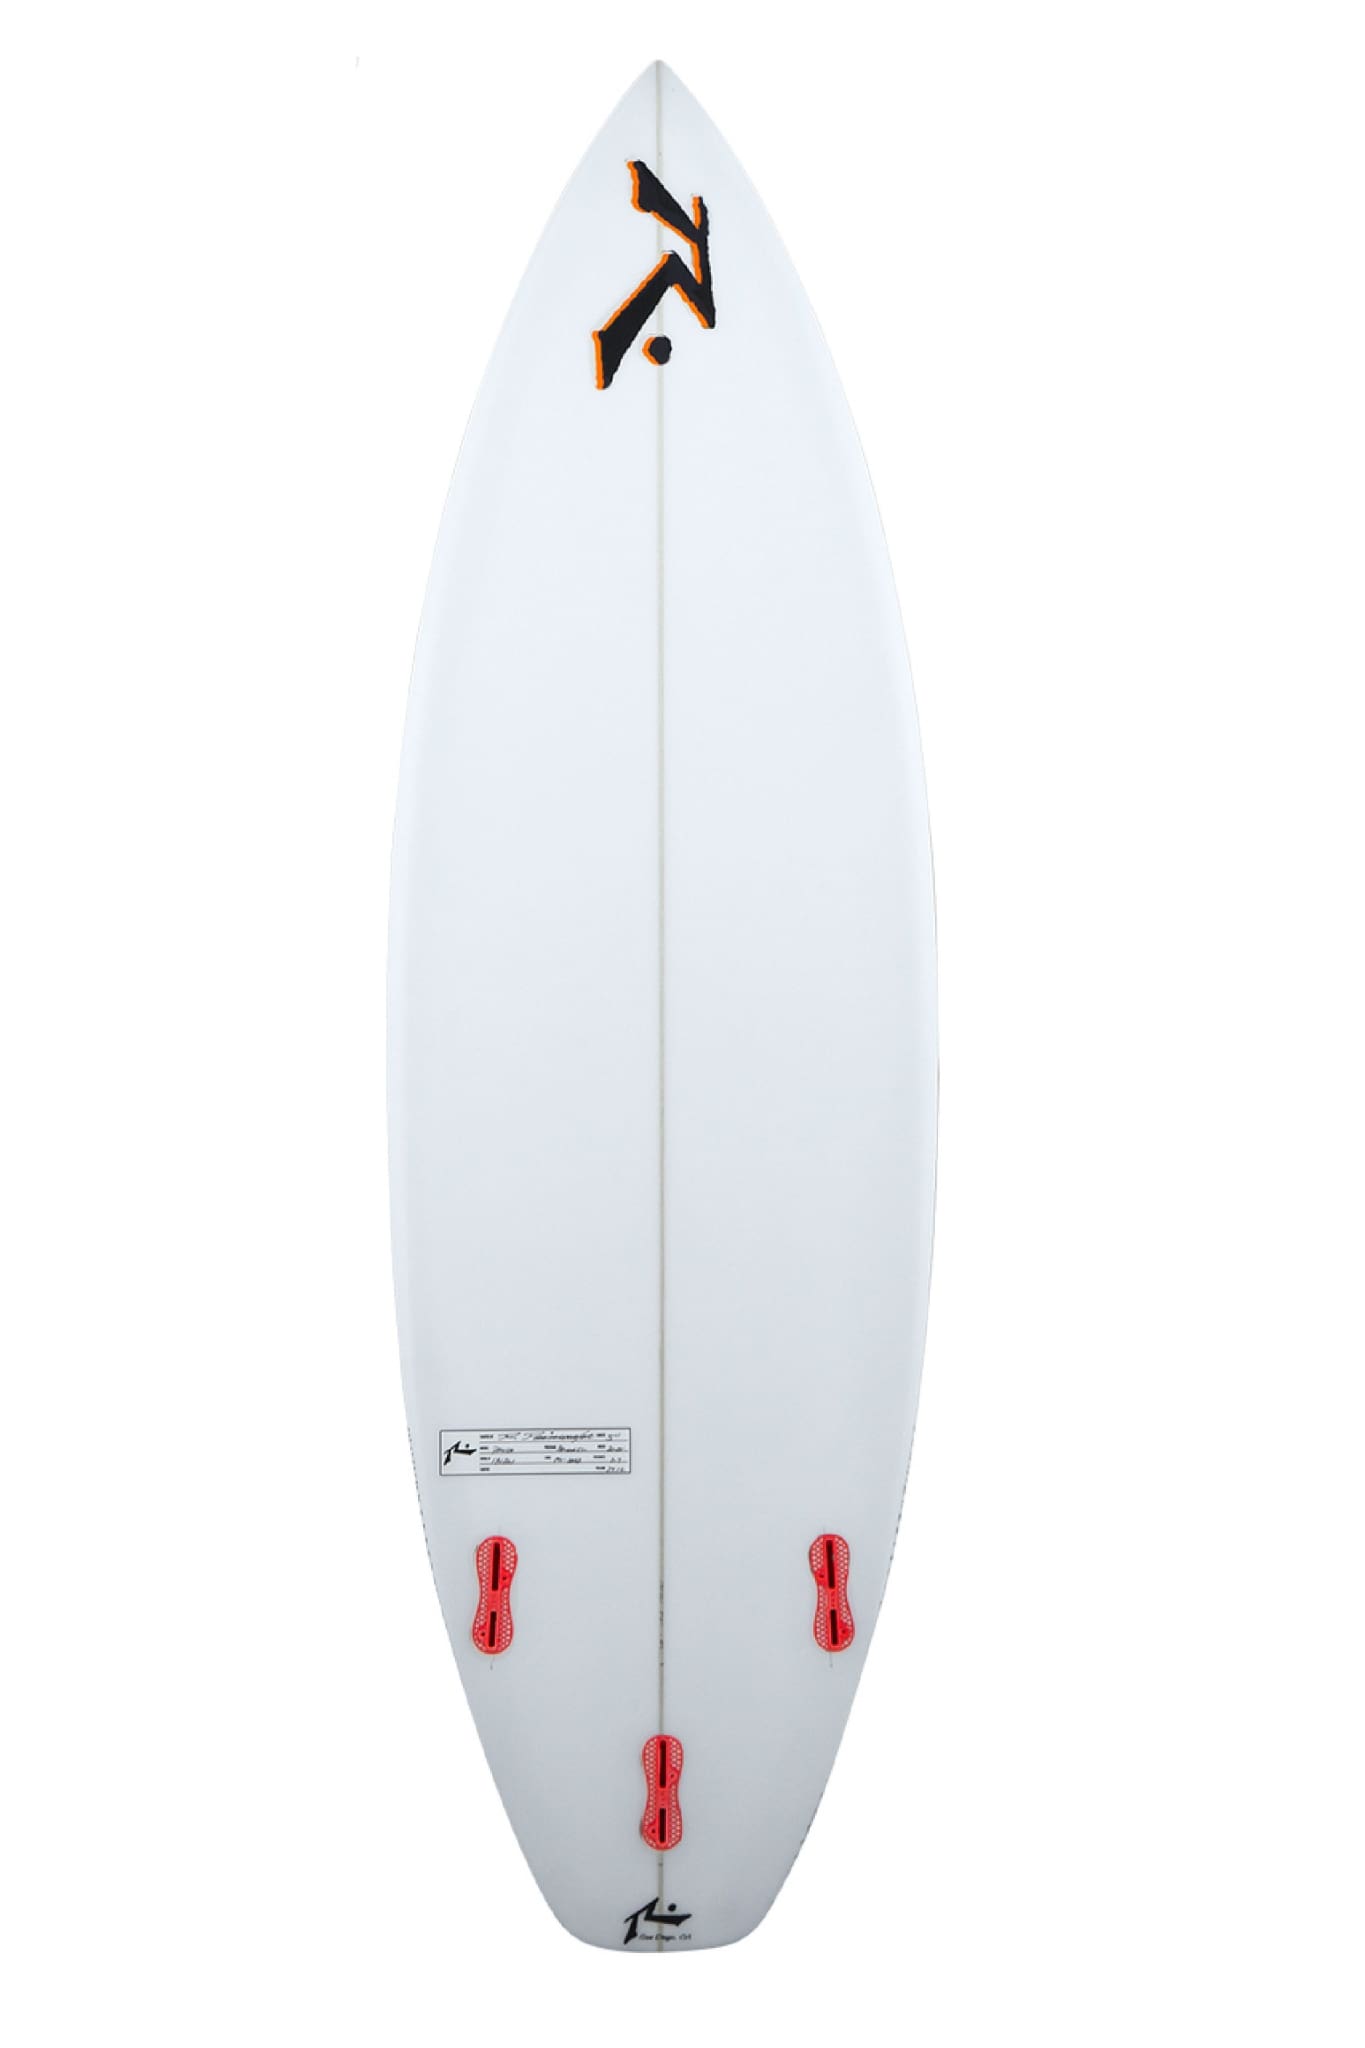 Panda | Surfboards-Rusty Surfboards South Africa